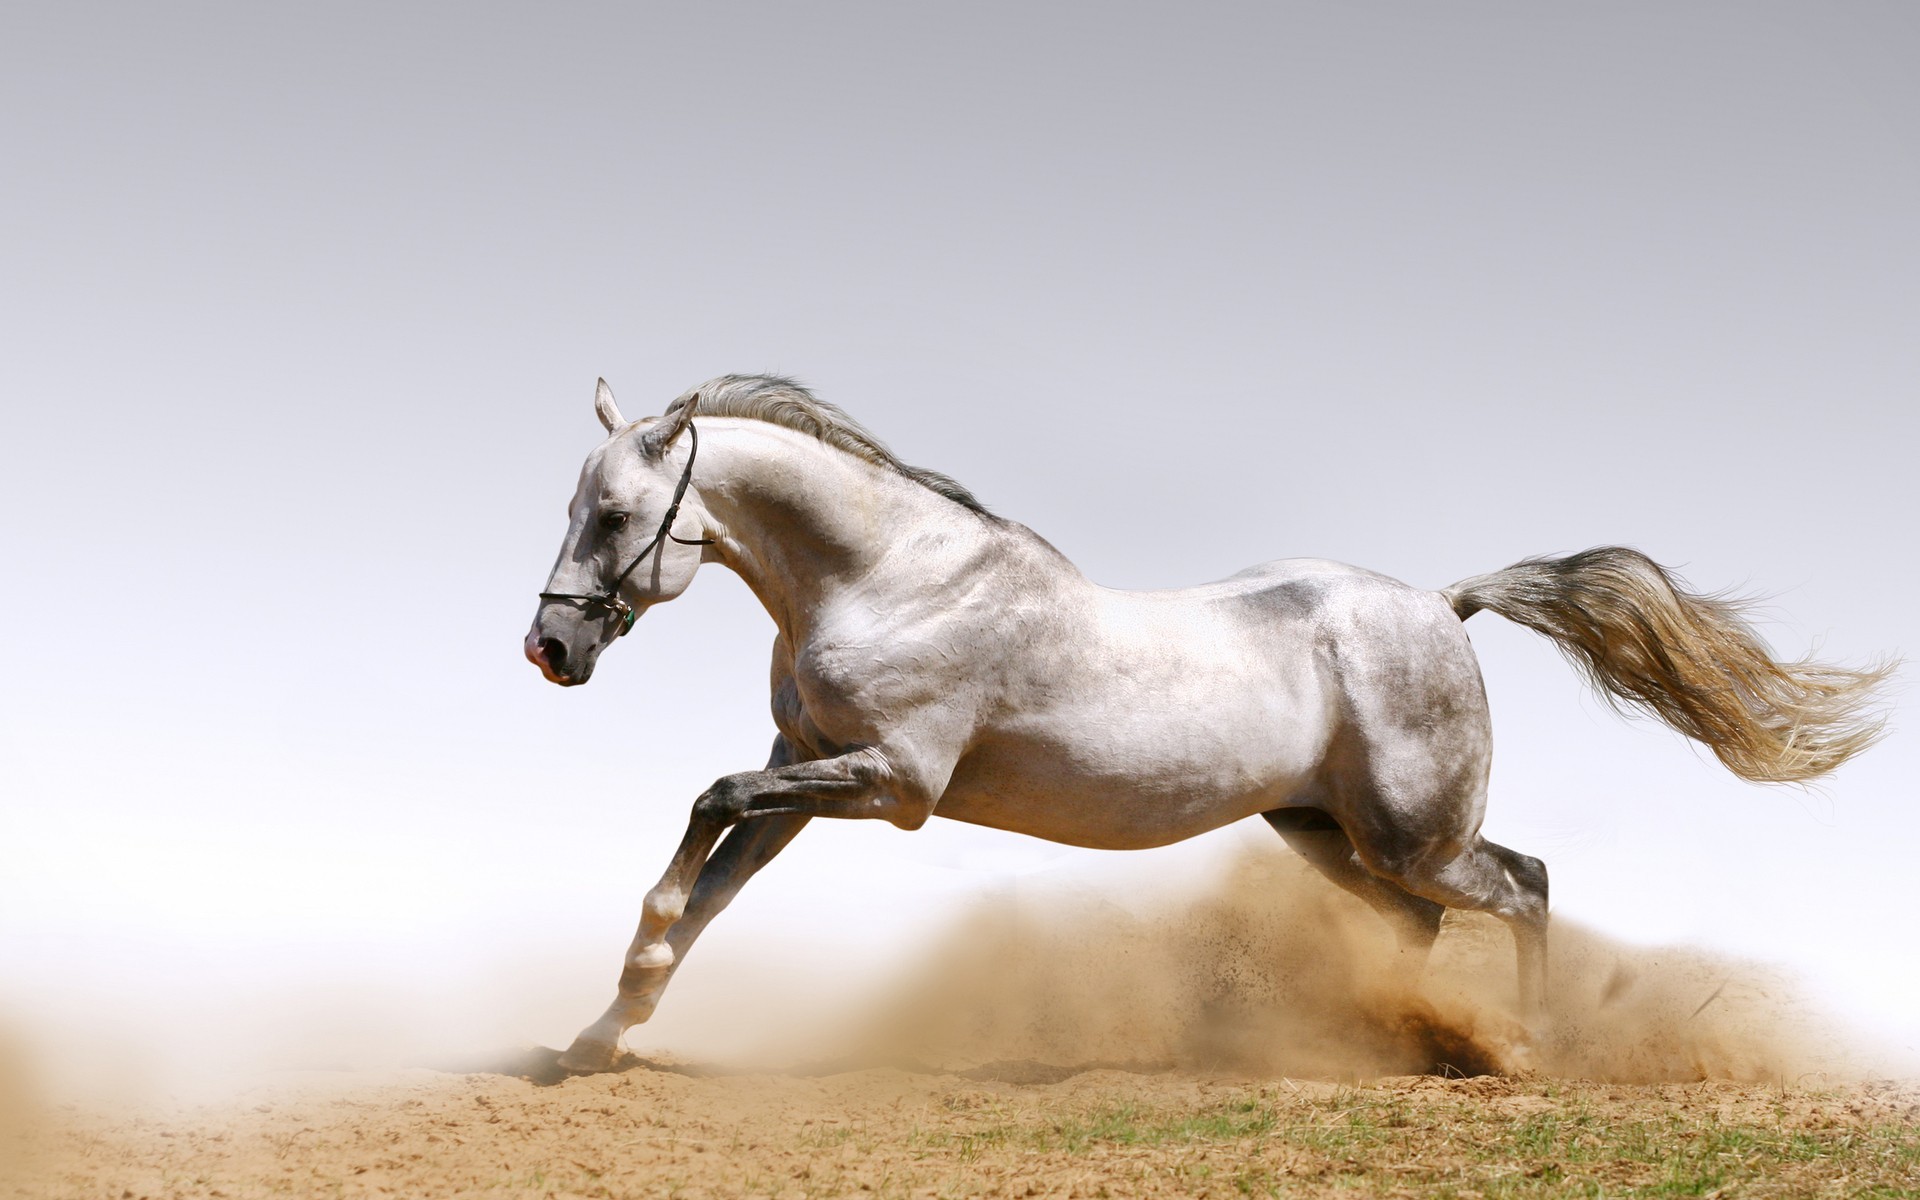 1920x1200 Use 9 Beautiful White Running Horse Wallpapers for your Desktop Background.  You can Share below White Horses Running Wallpapers for Desktop .